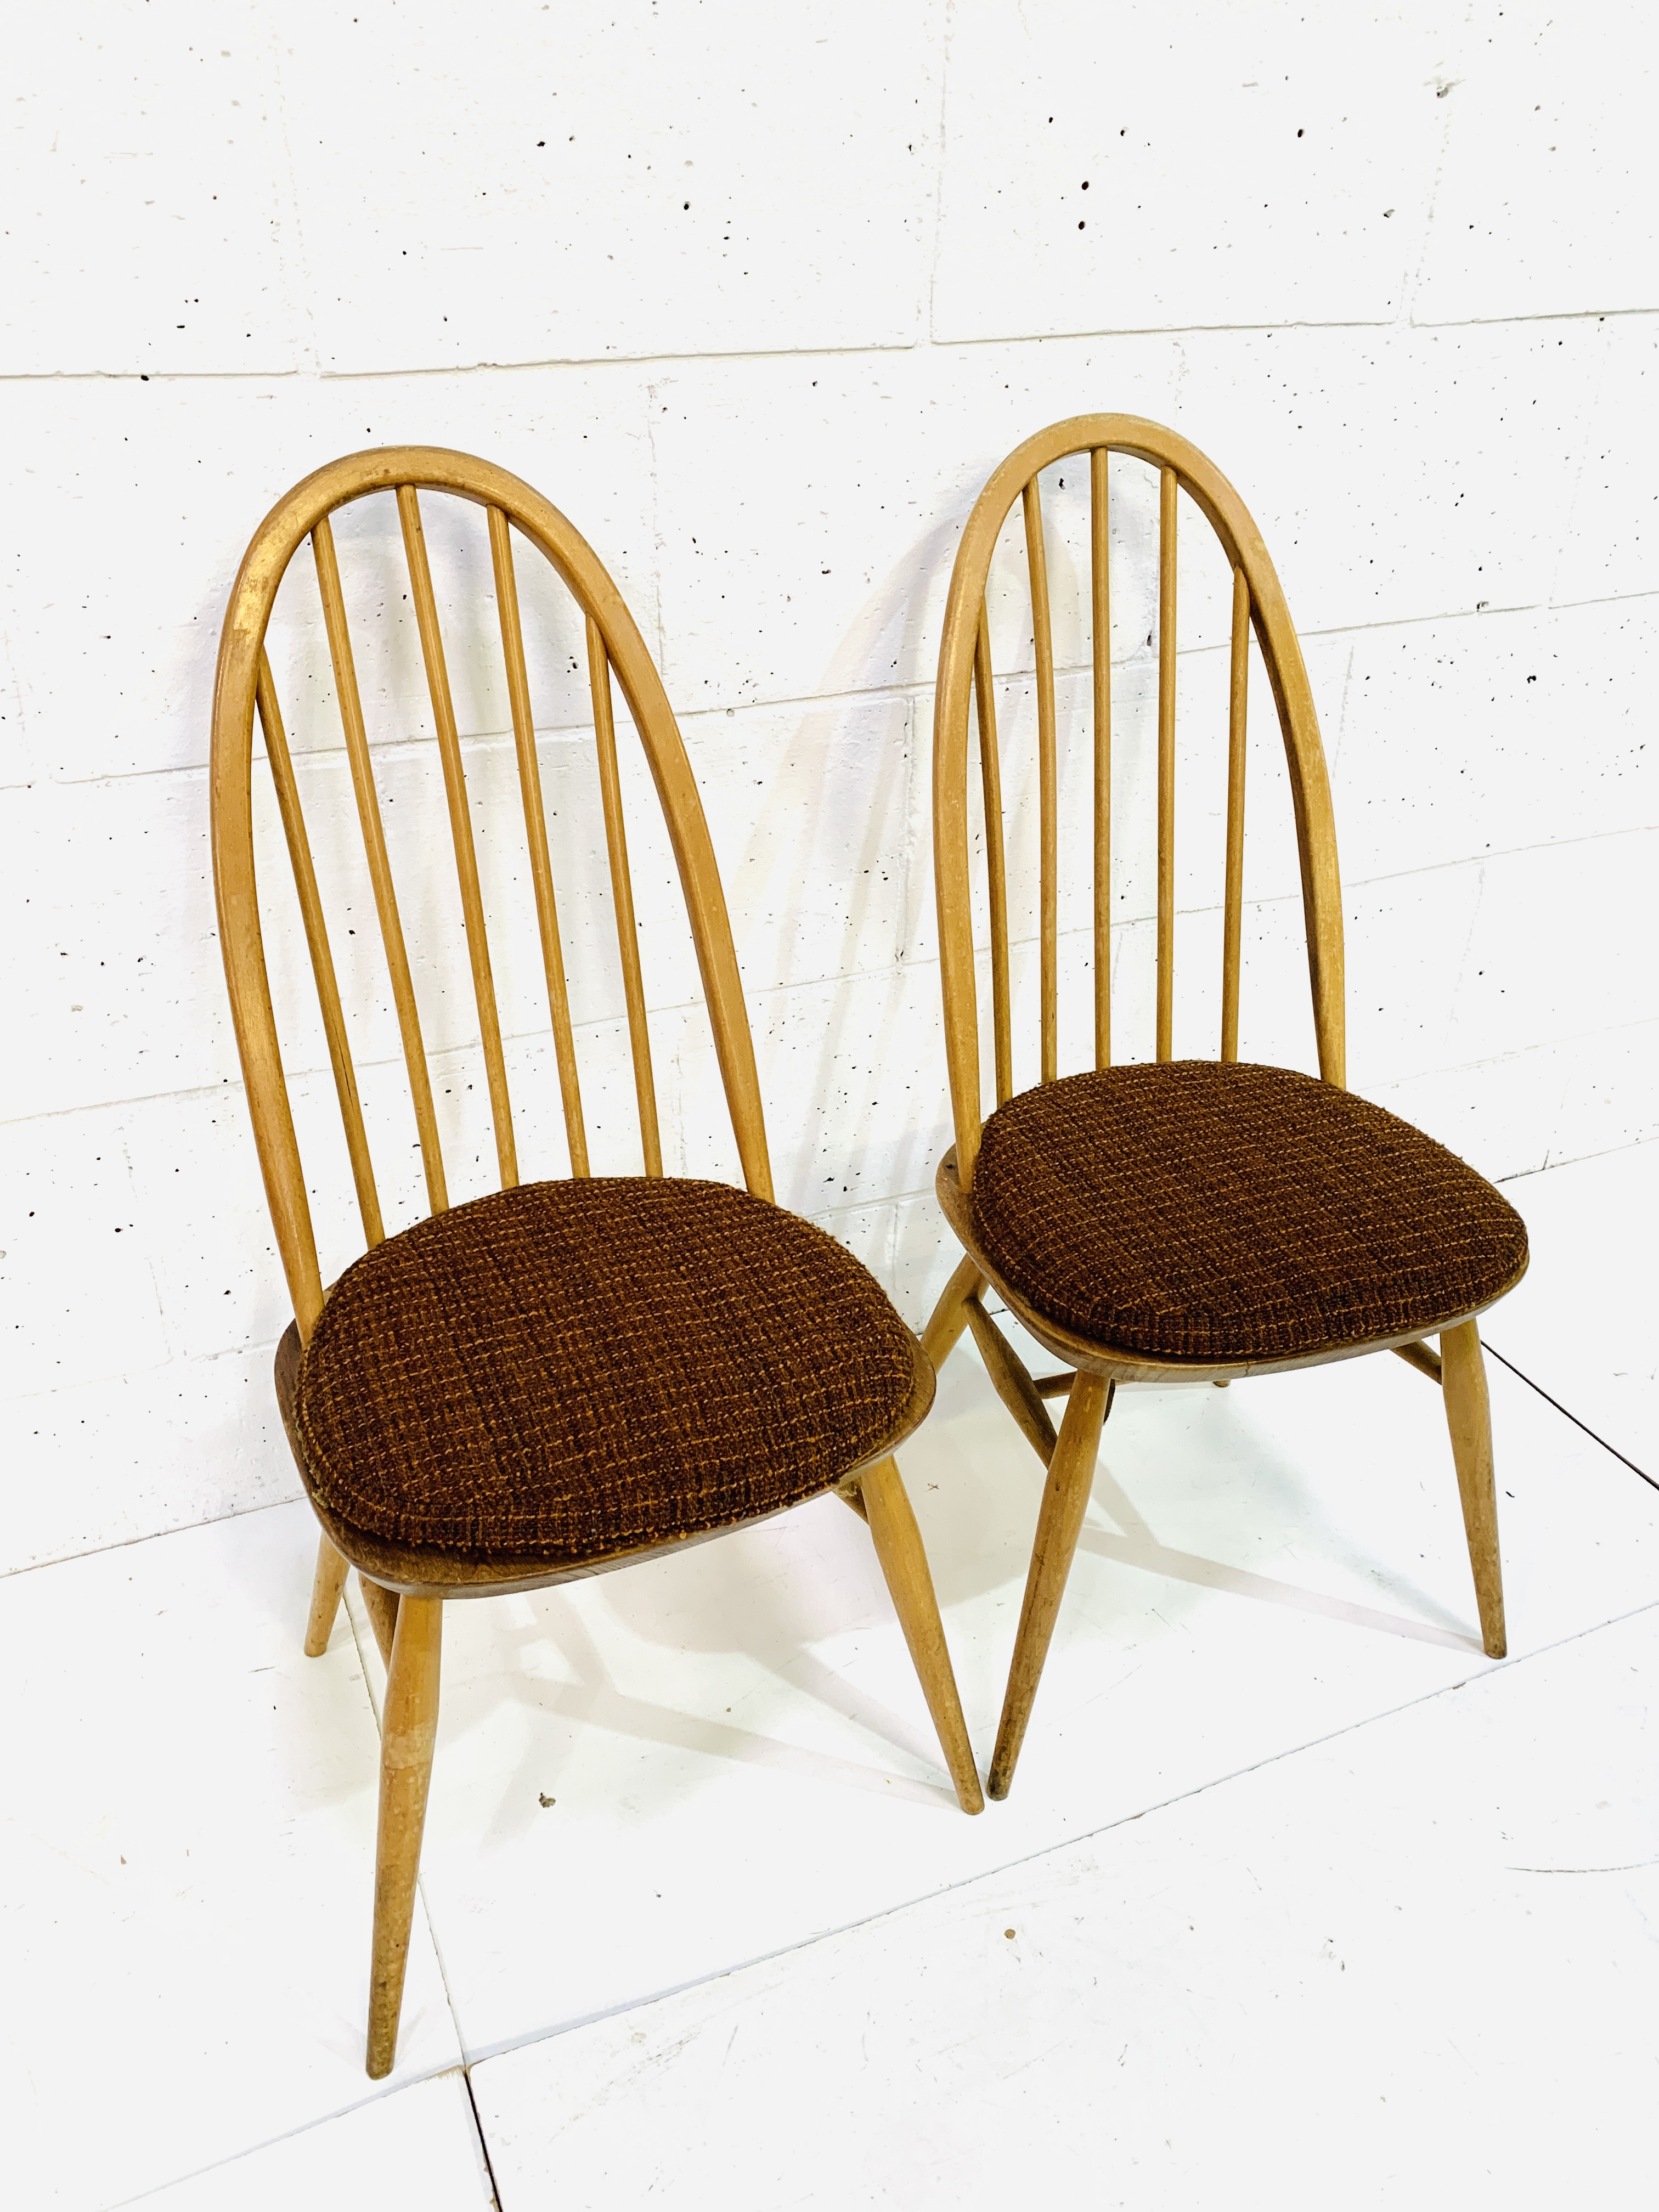 Pair of Ercol rail back chairs - Image 5 of 6